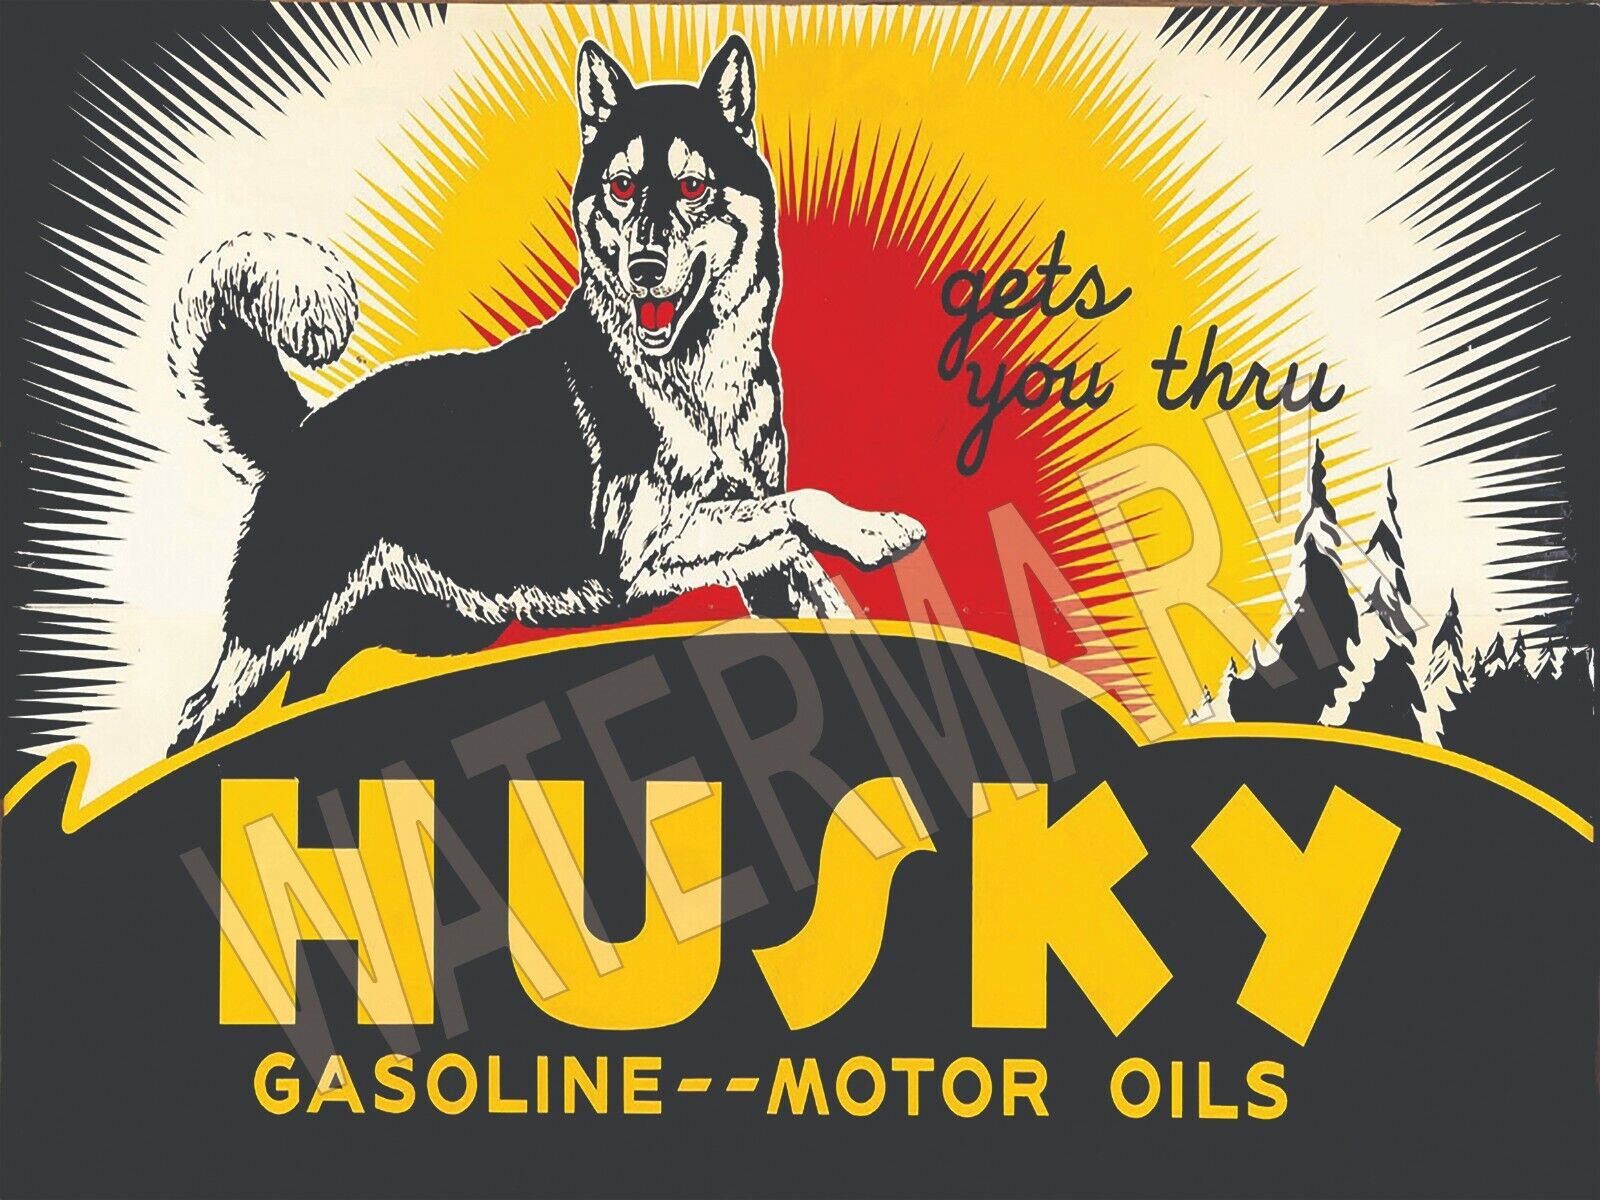 Husky Gas Motor Oil High Quality Metal Magnet 3 x 4 inches 9140